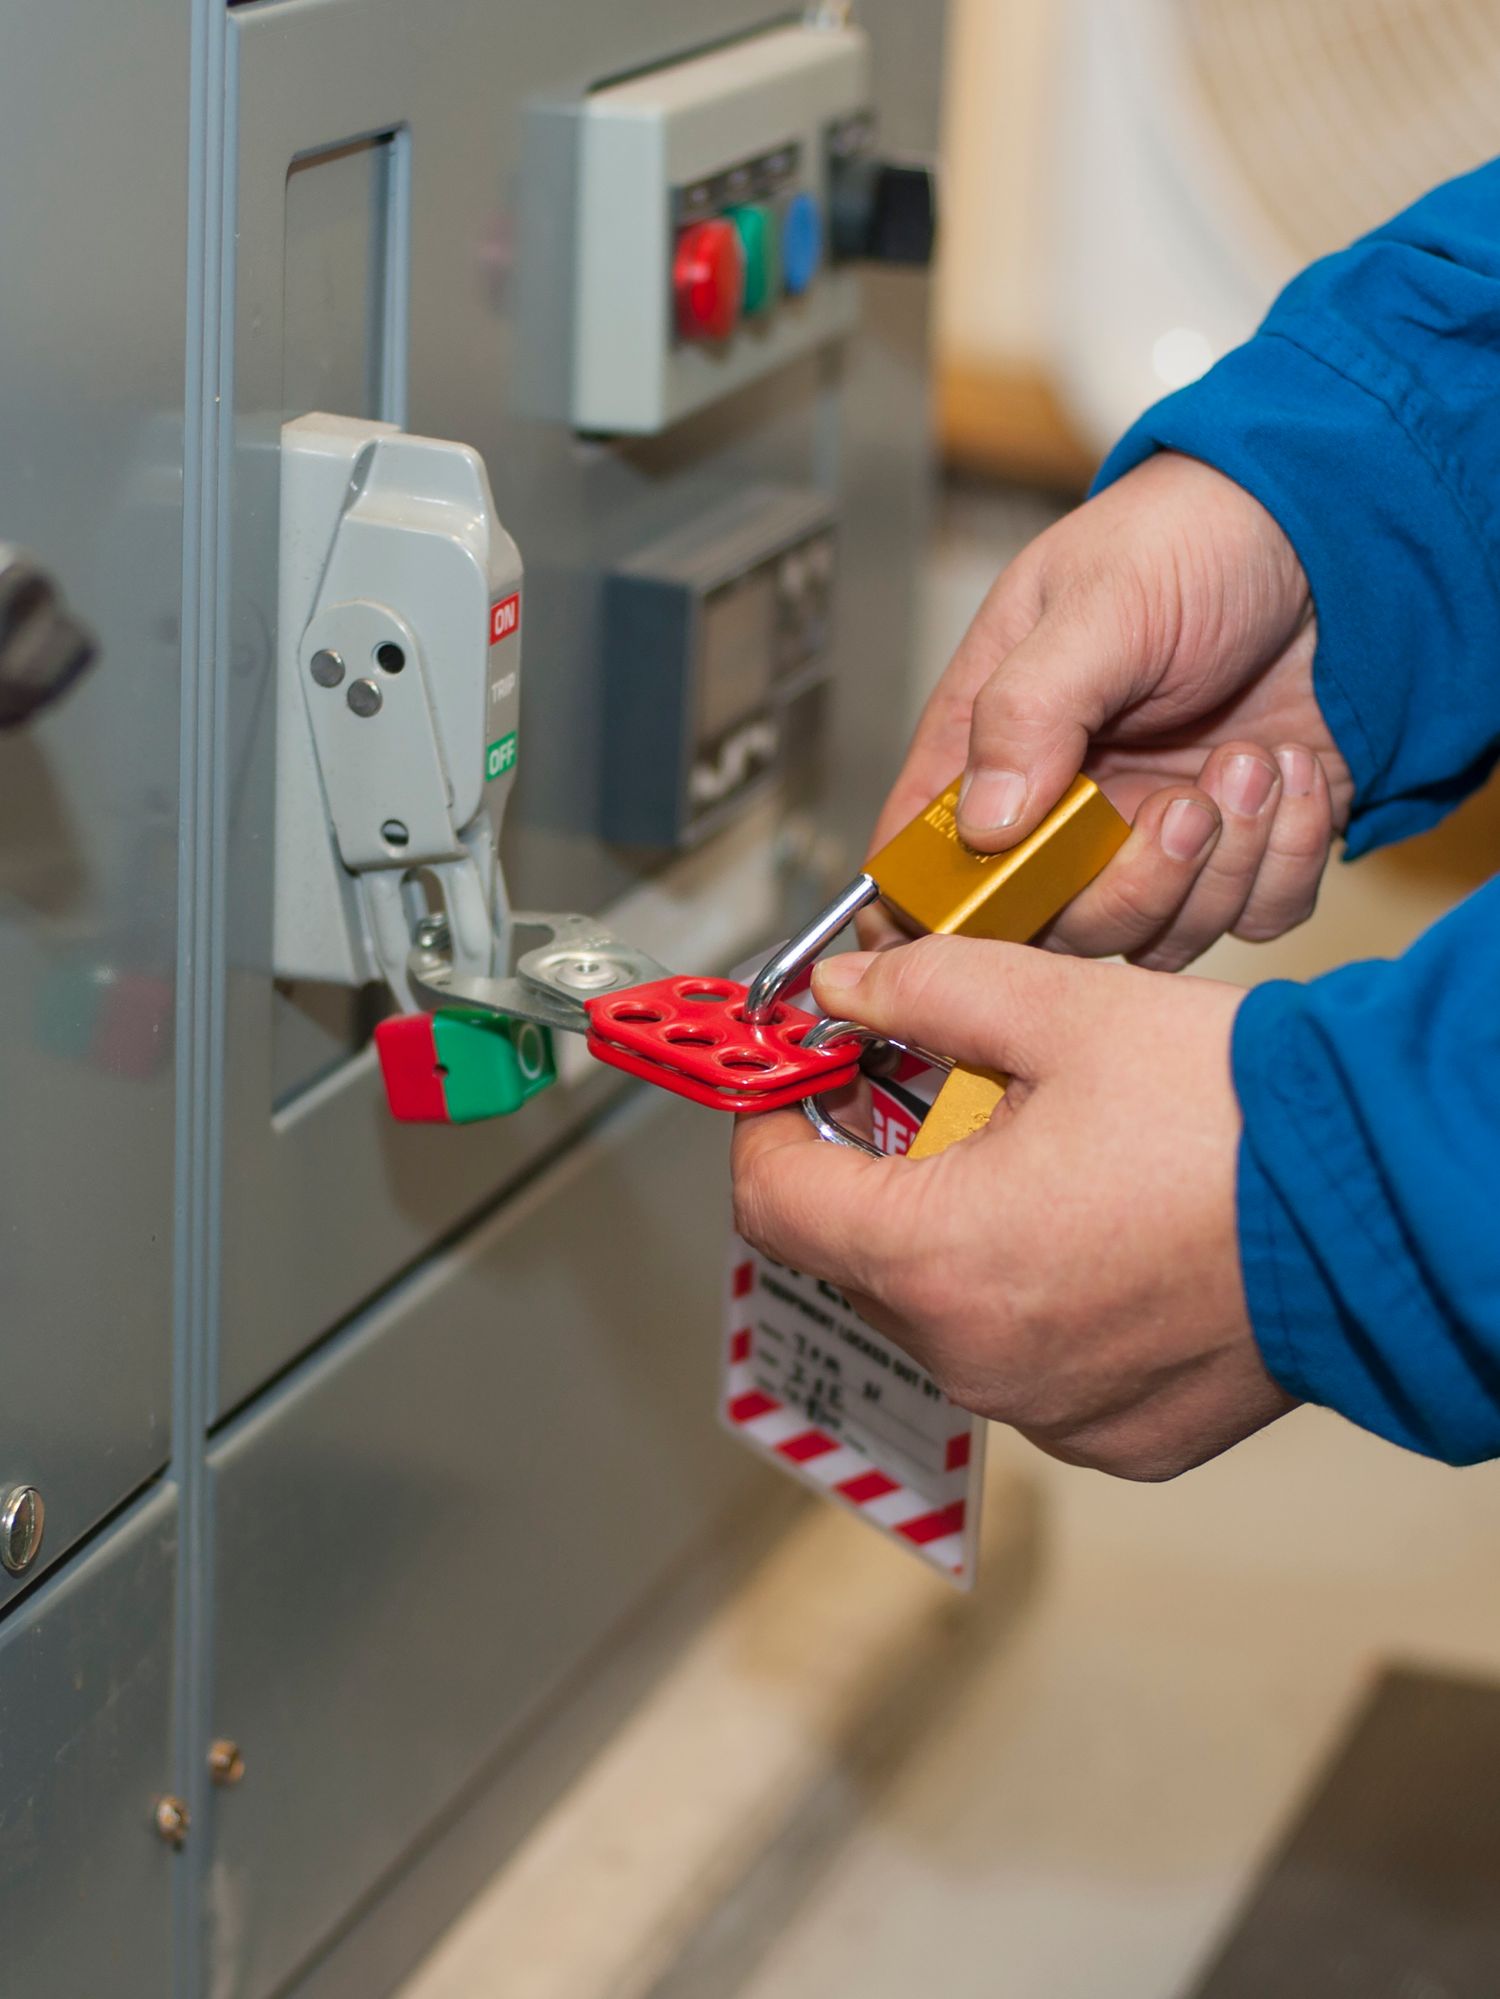 electrical - What is the difference between a handle tie and common  trip in circuit breakers? - Home Improvement Stack Exchange